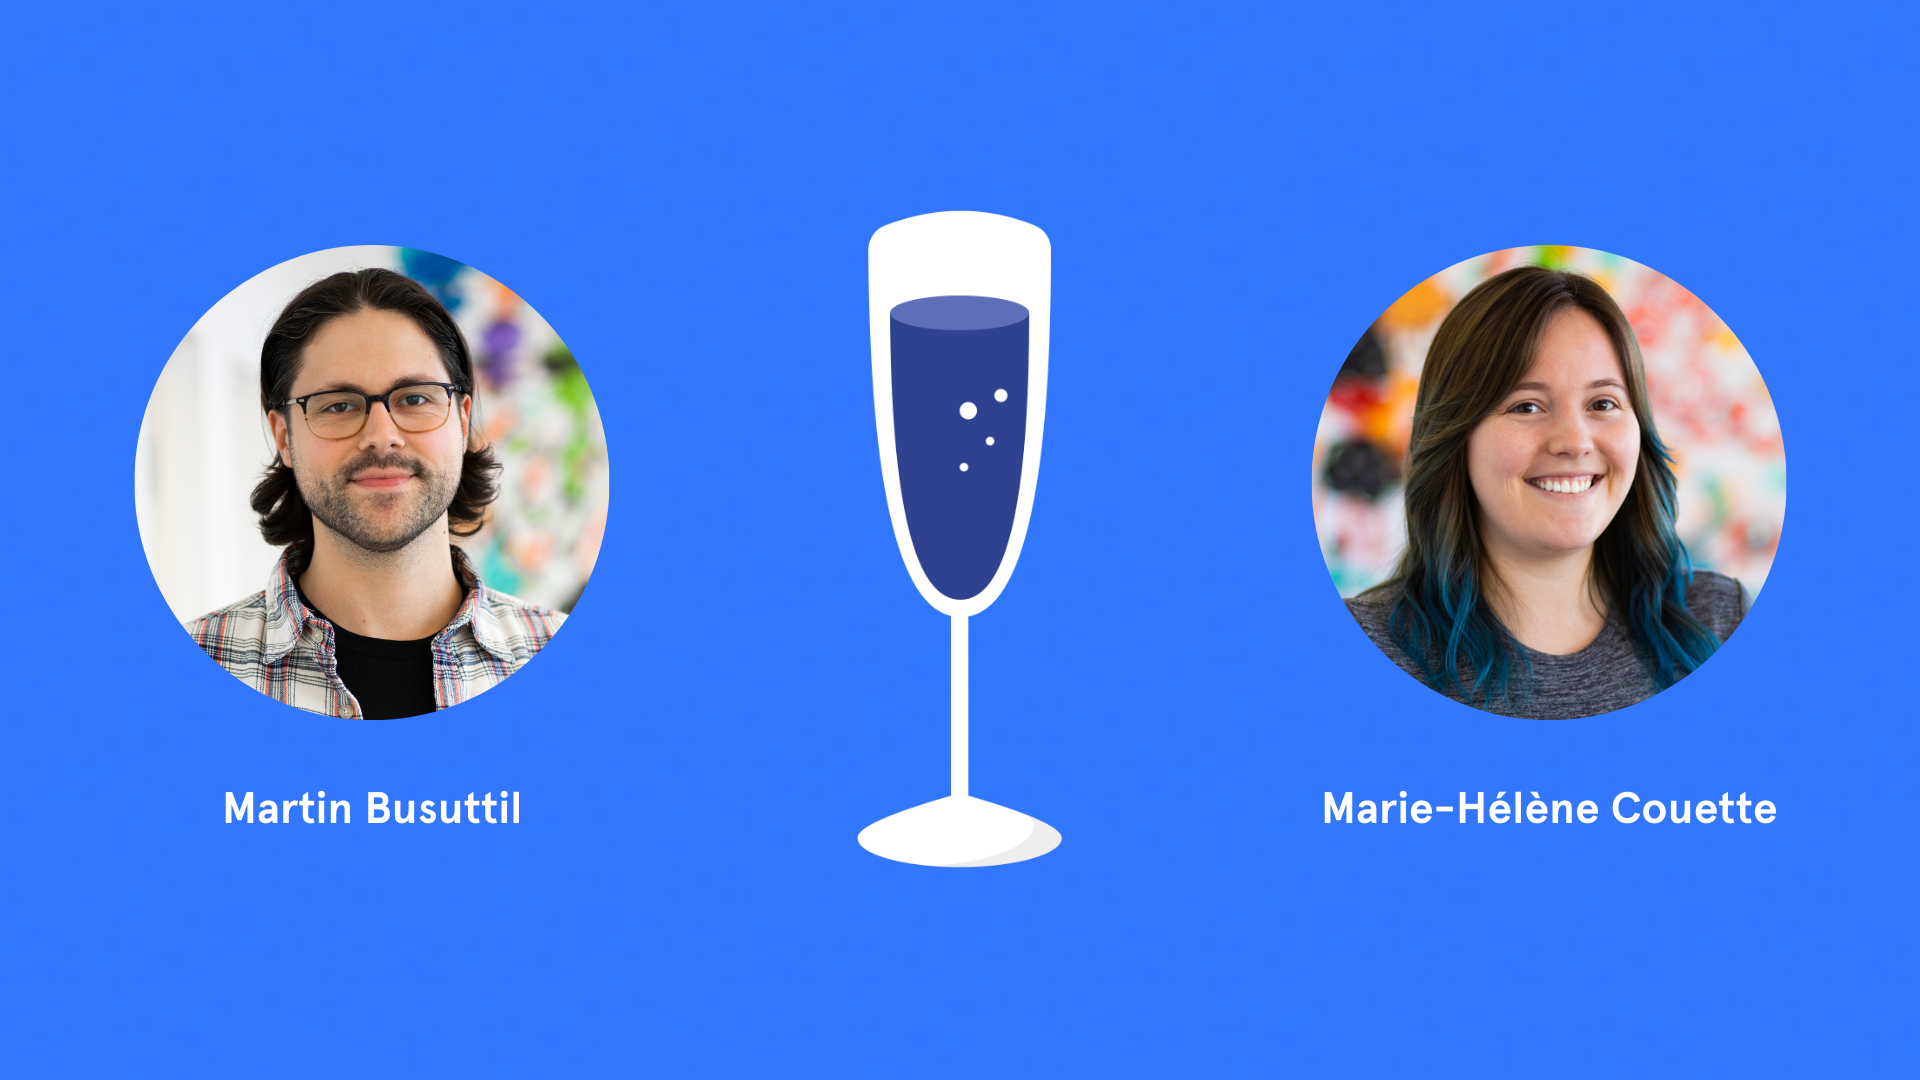 Photos of Martin Busuttil and Marie-Hélène Couette separated by a glass of champagne